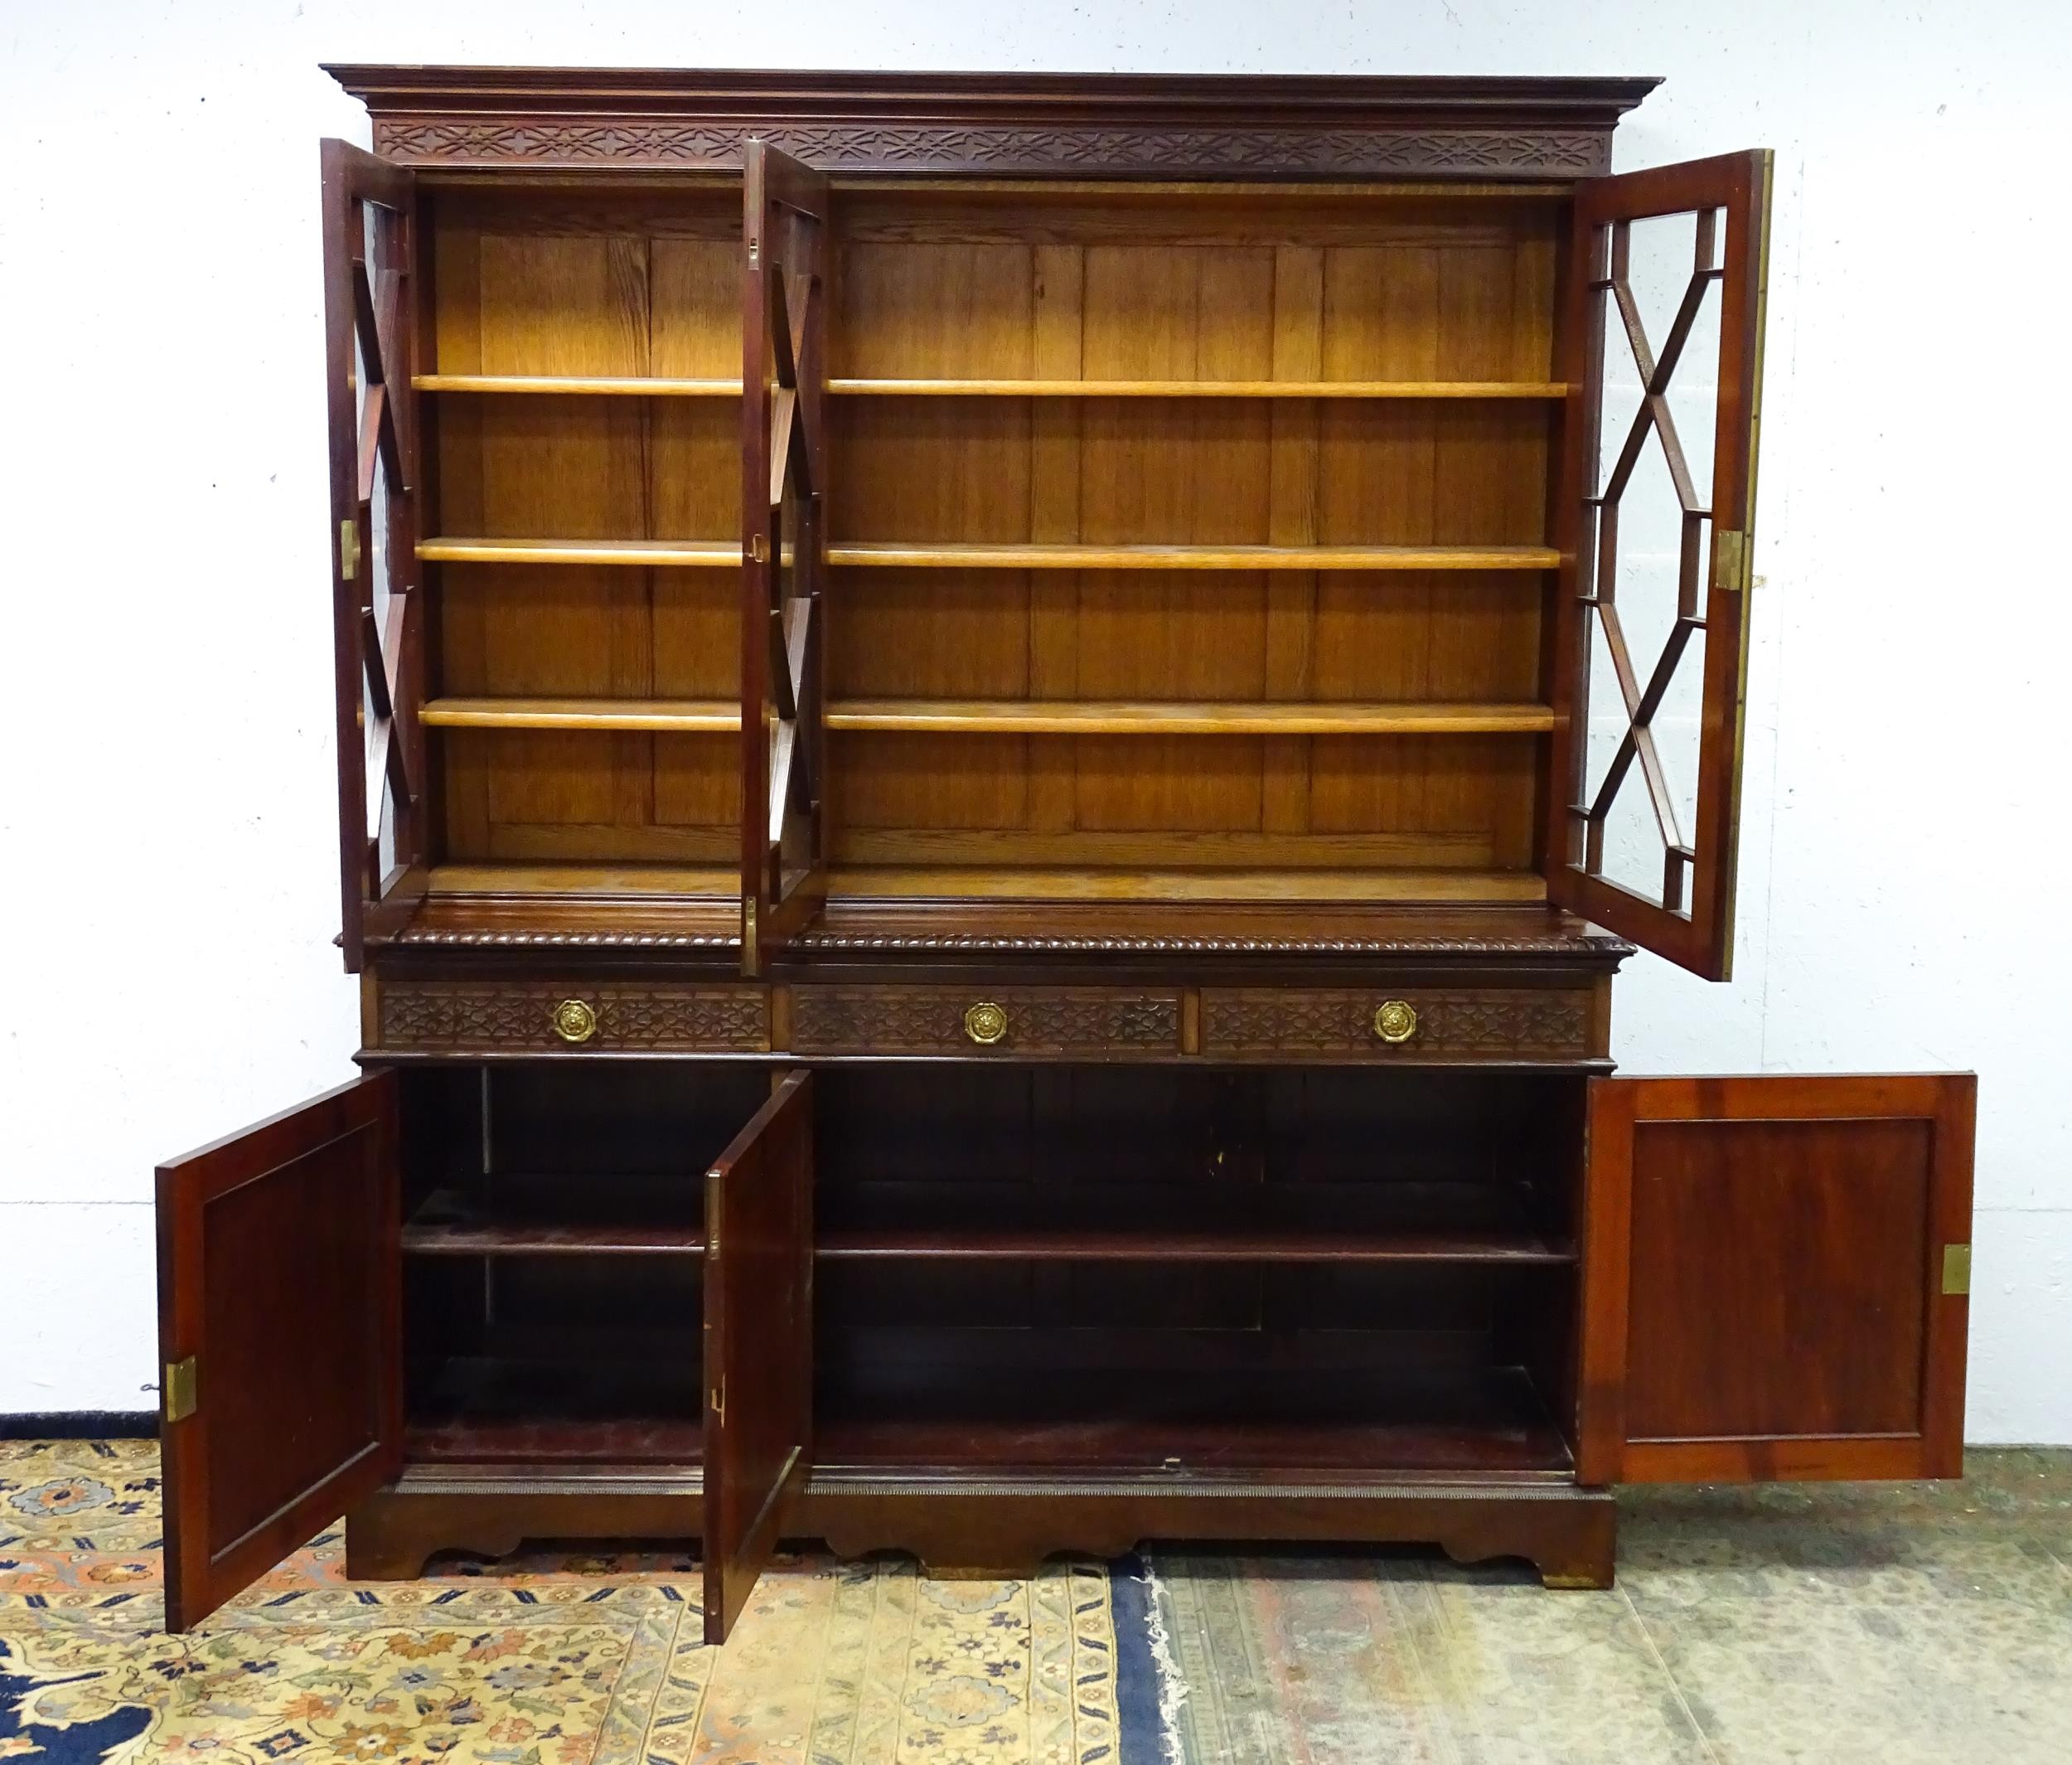 A late 19thC mahogany glazed bookcase by S & H Jewell, Queen Street, London. The cornice with - Image 9 of 9